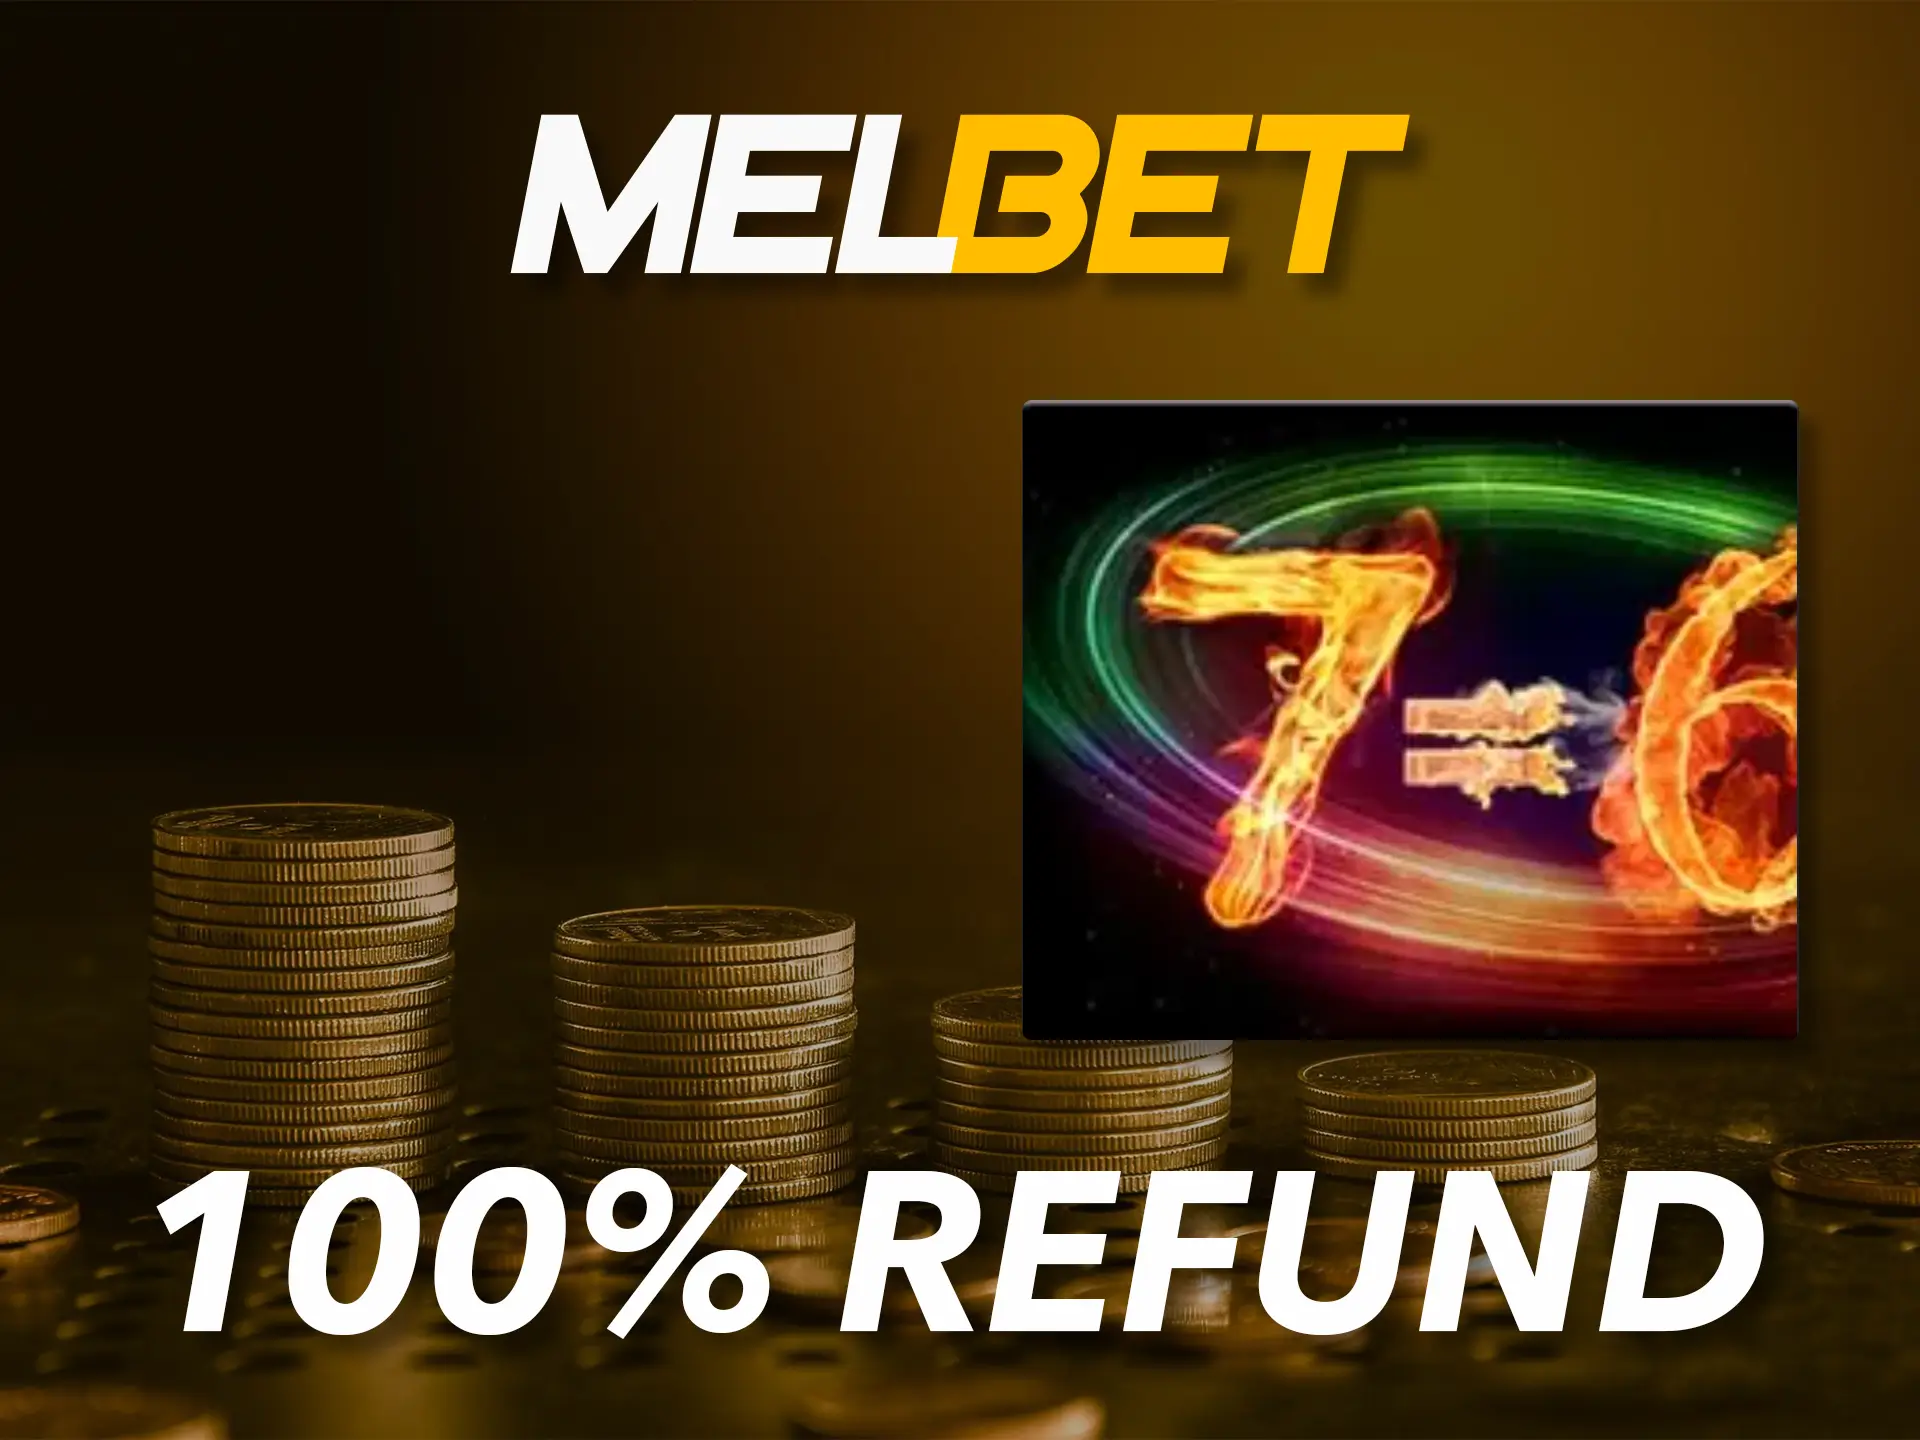 A great bonus from Melbet for risk lovers.